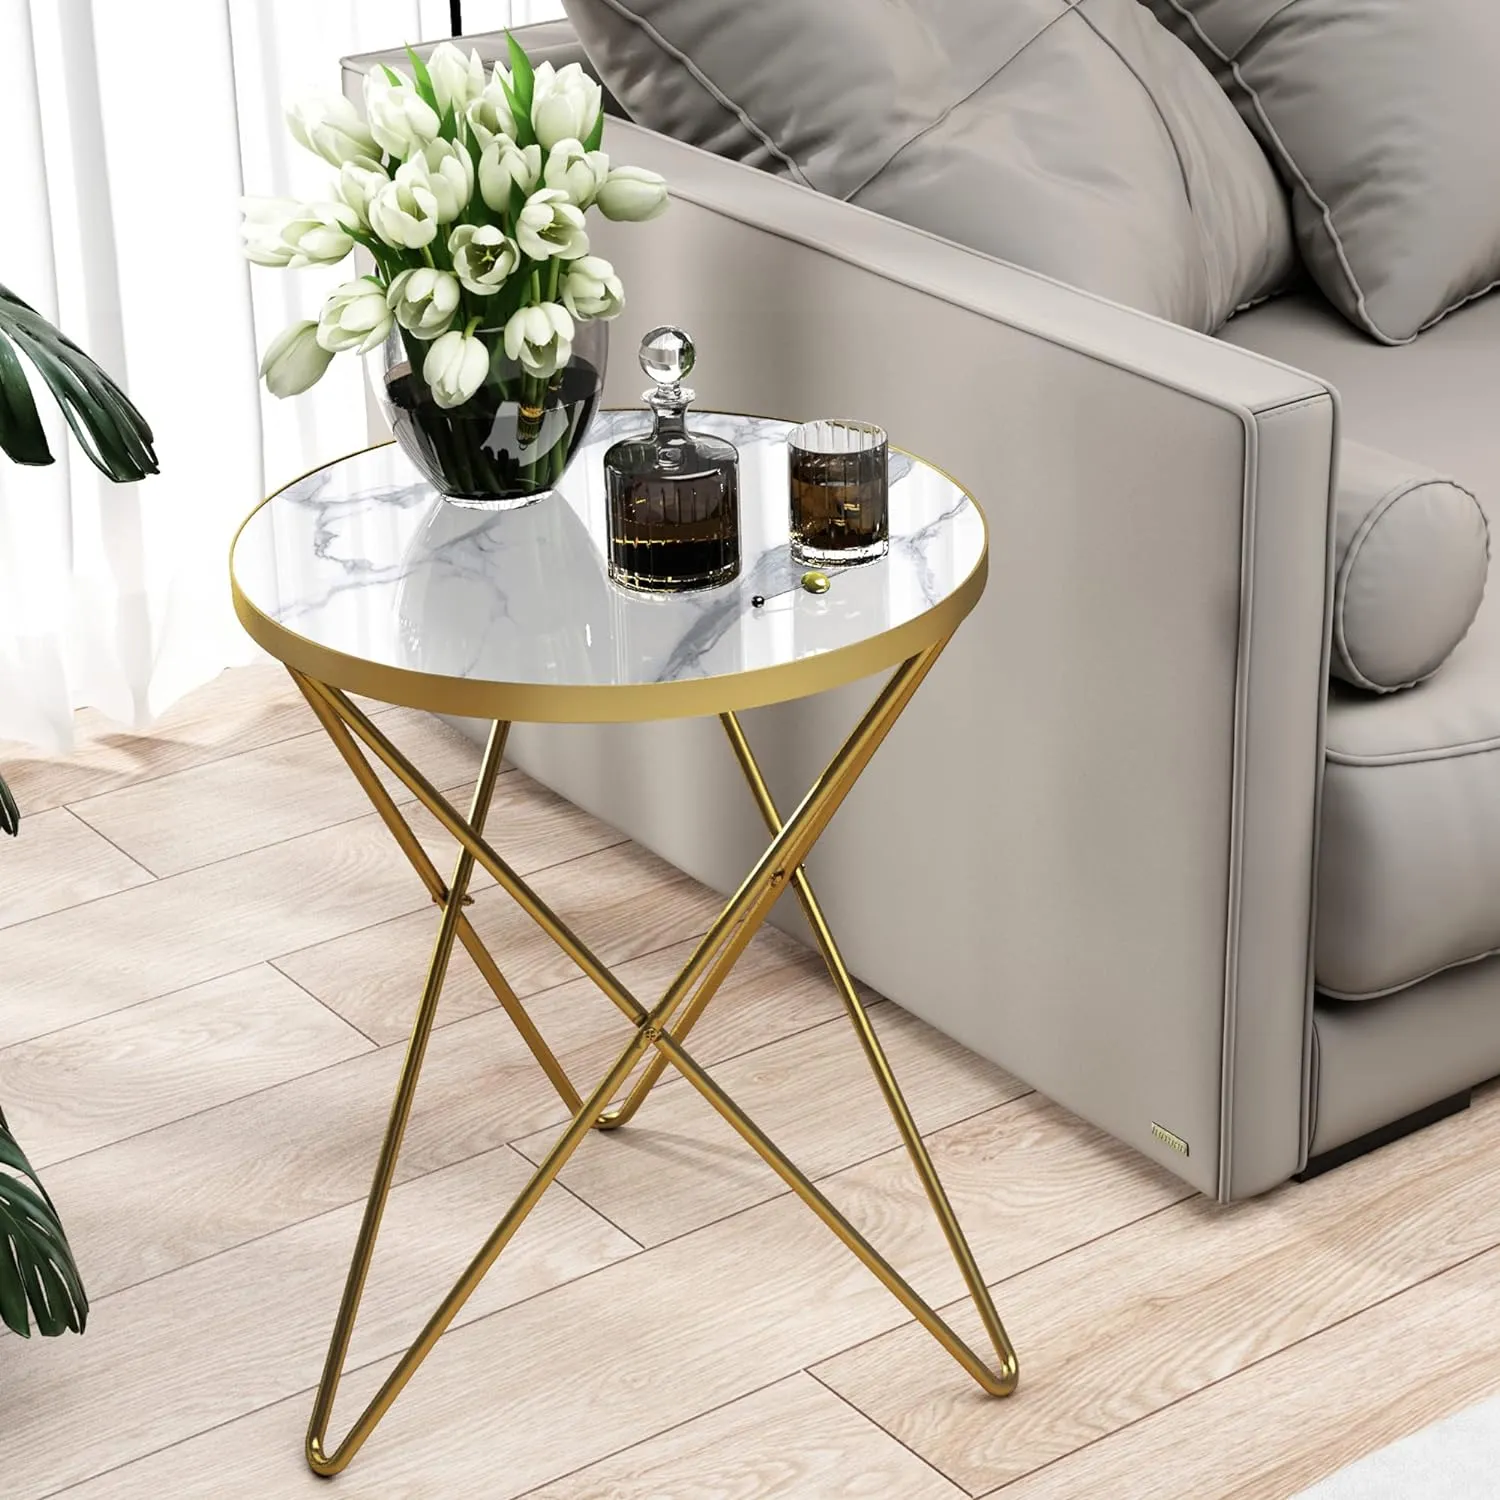 HLR Modern Round Side Table, End Table with Marble Effect Top and Gold Metal Frame, Small Side Table for Living Room, Bedroom, Sofa and Couch, Gold Legs, White Marble top